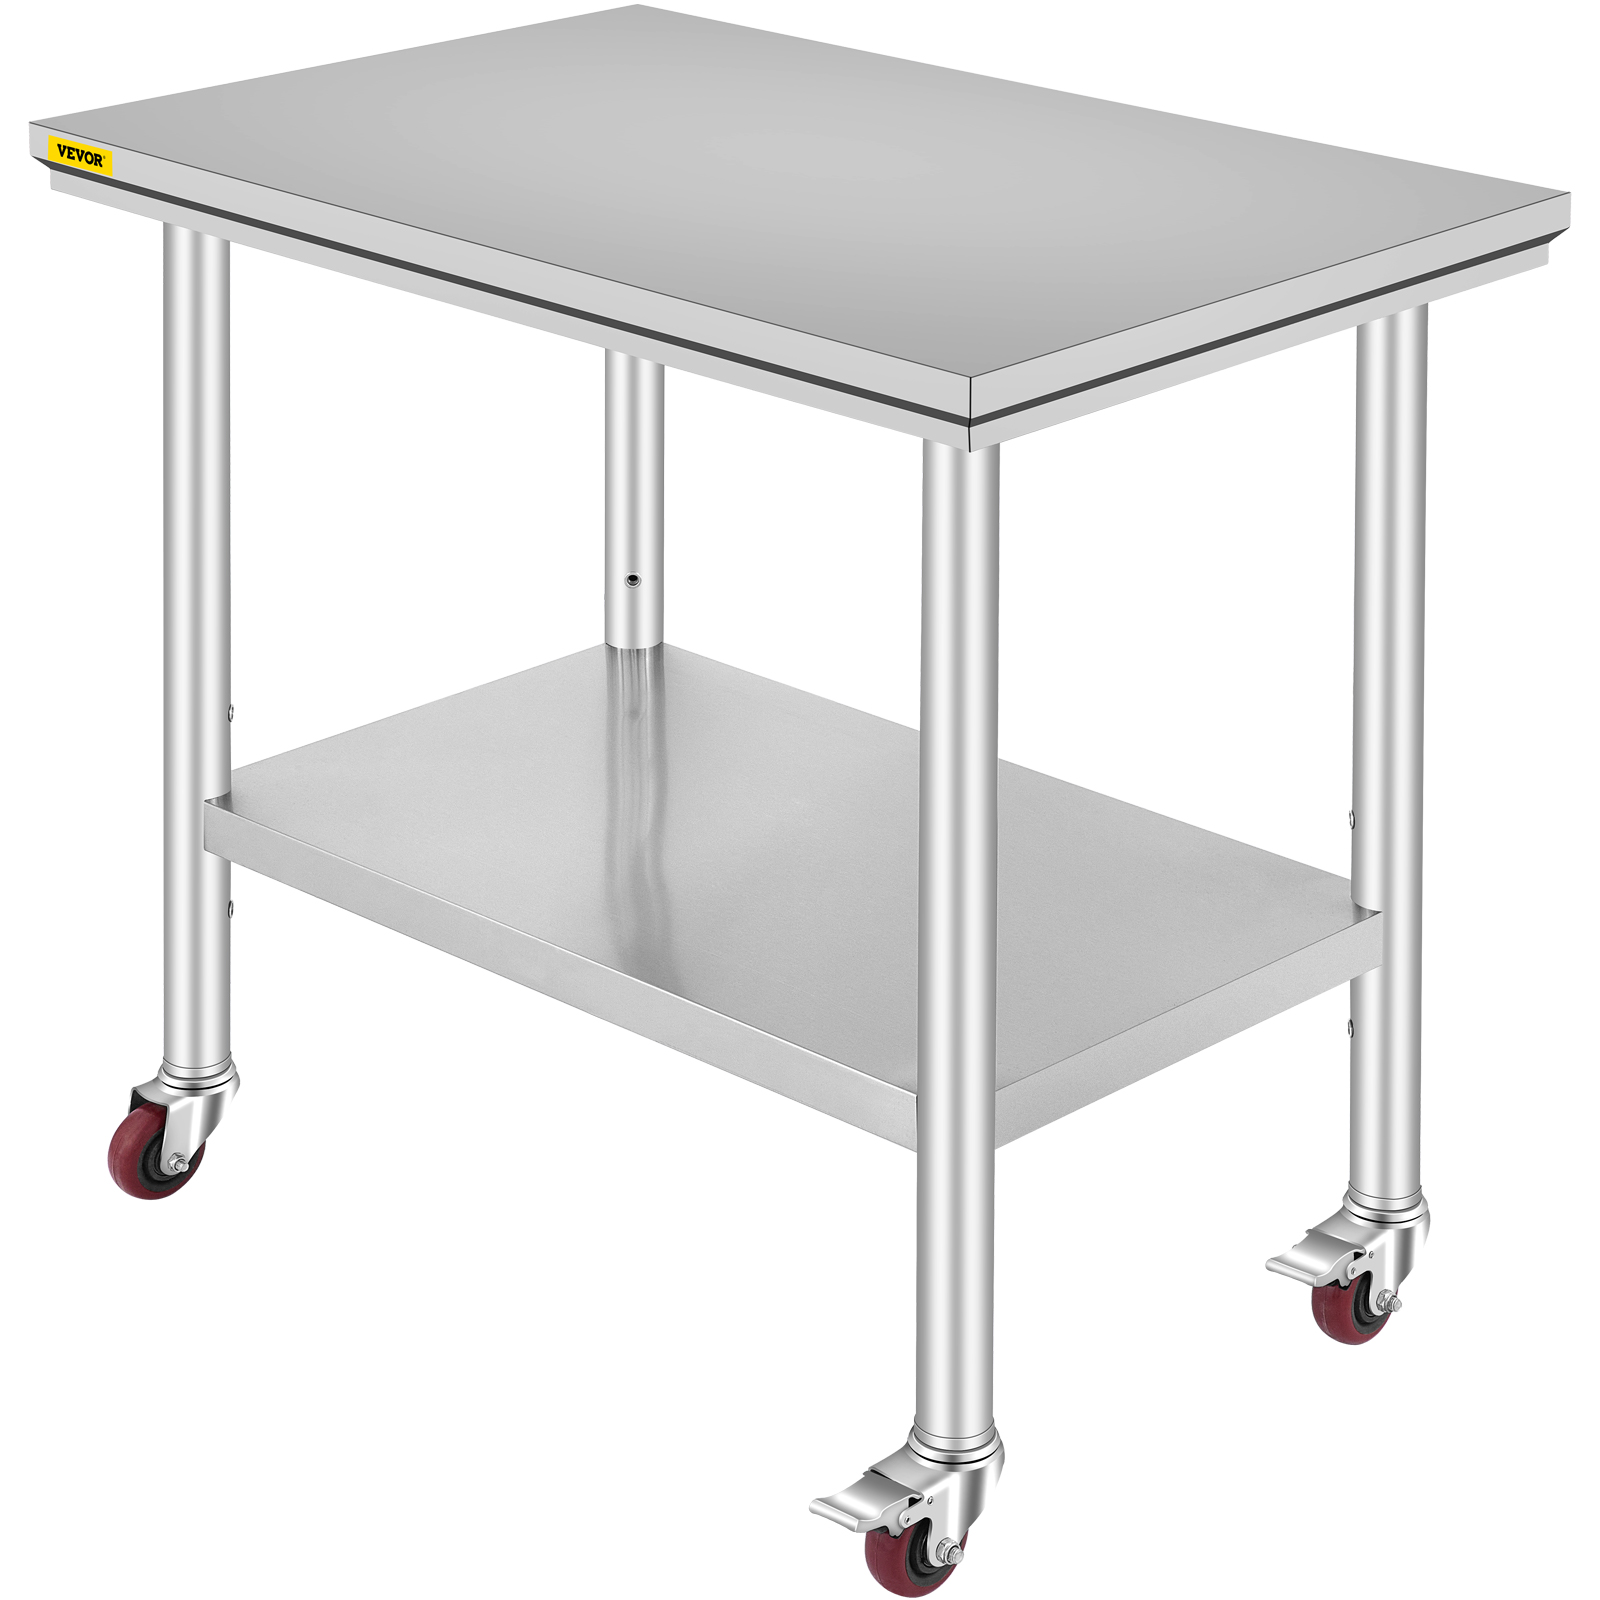 Commercial Workstation for Kitchen Restaurant VEVOR Stainless Steel Prep Table 440lbs Load Capacity Heavy Duty Metal Worktable with Backsplash and Adjustable Undershelf 36 x 24 x 35 Inch 